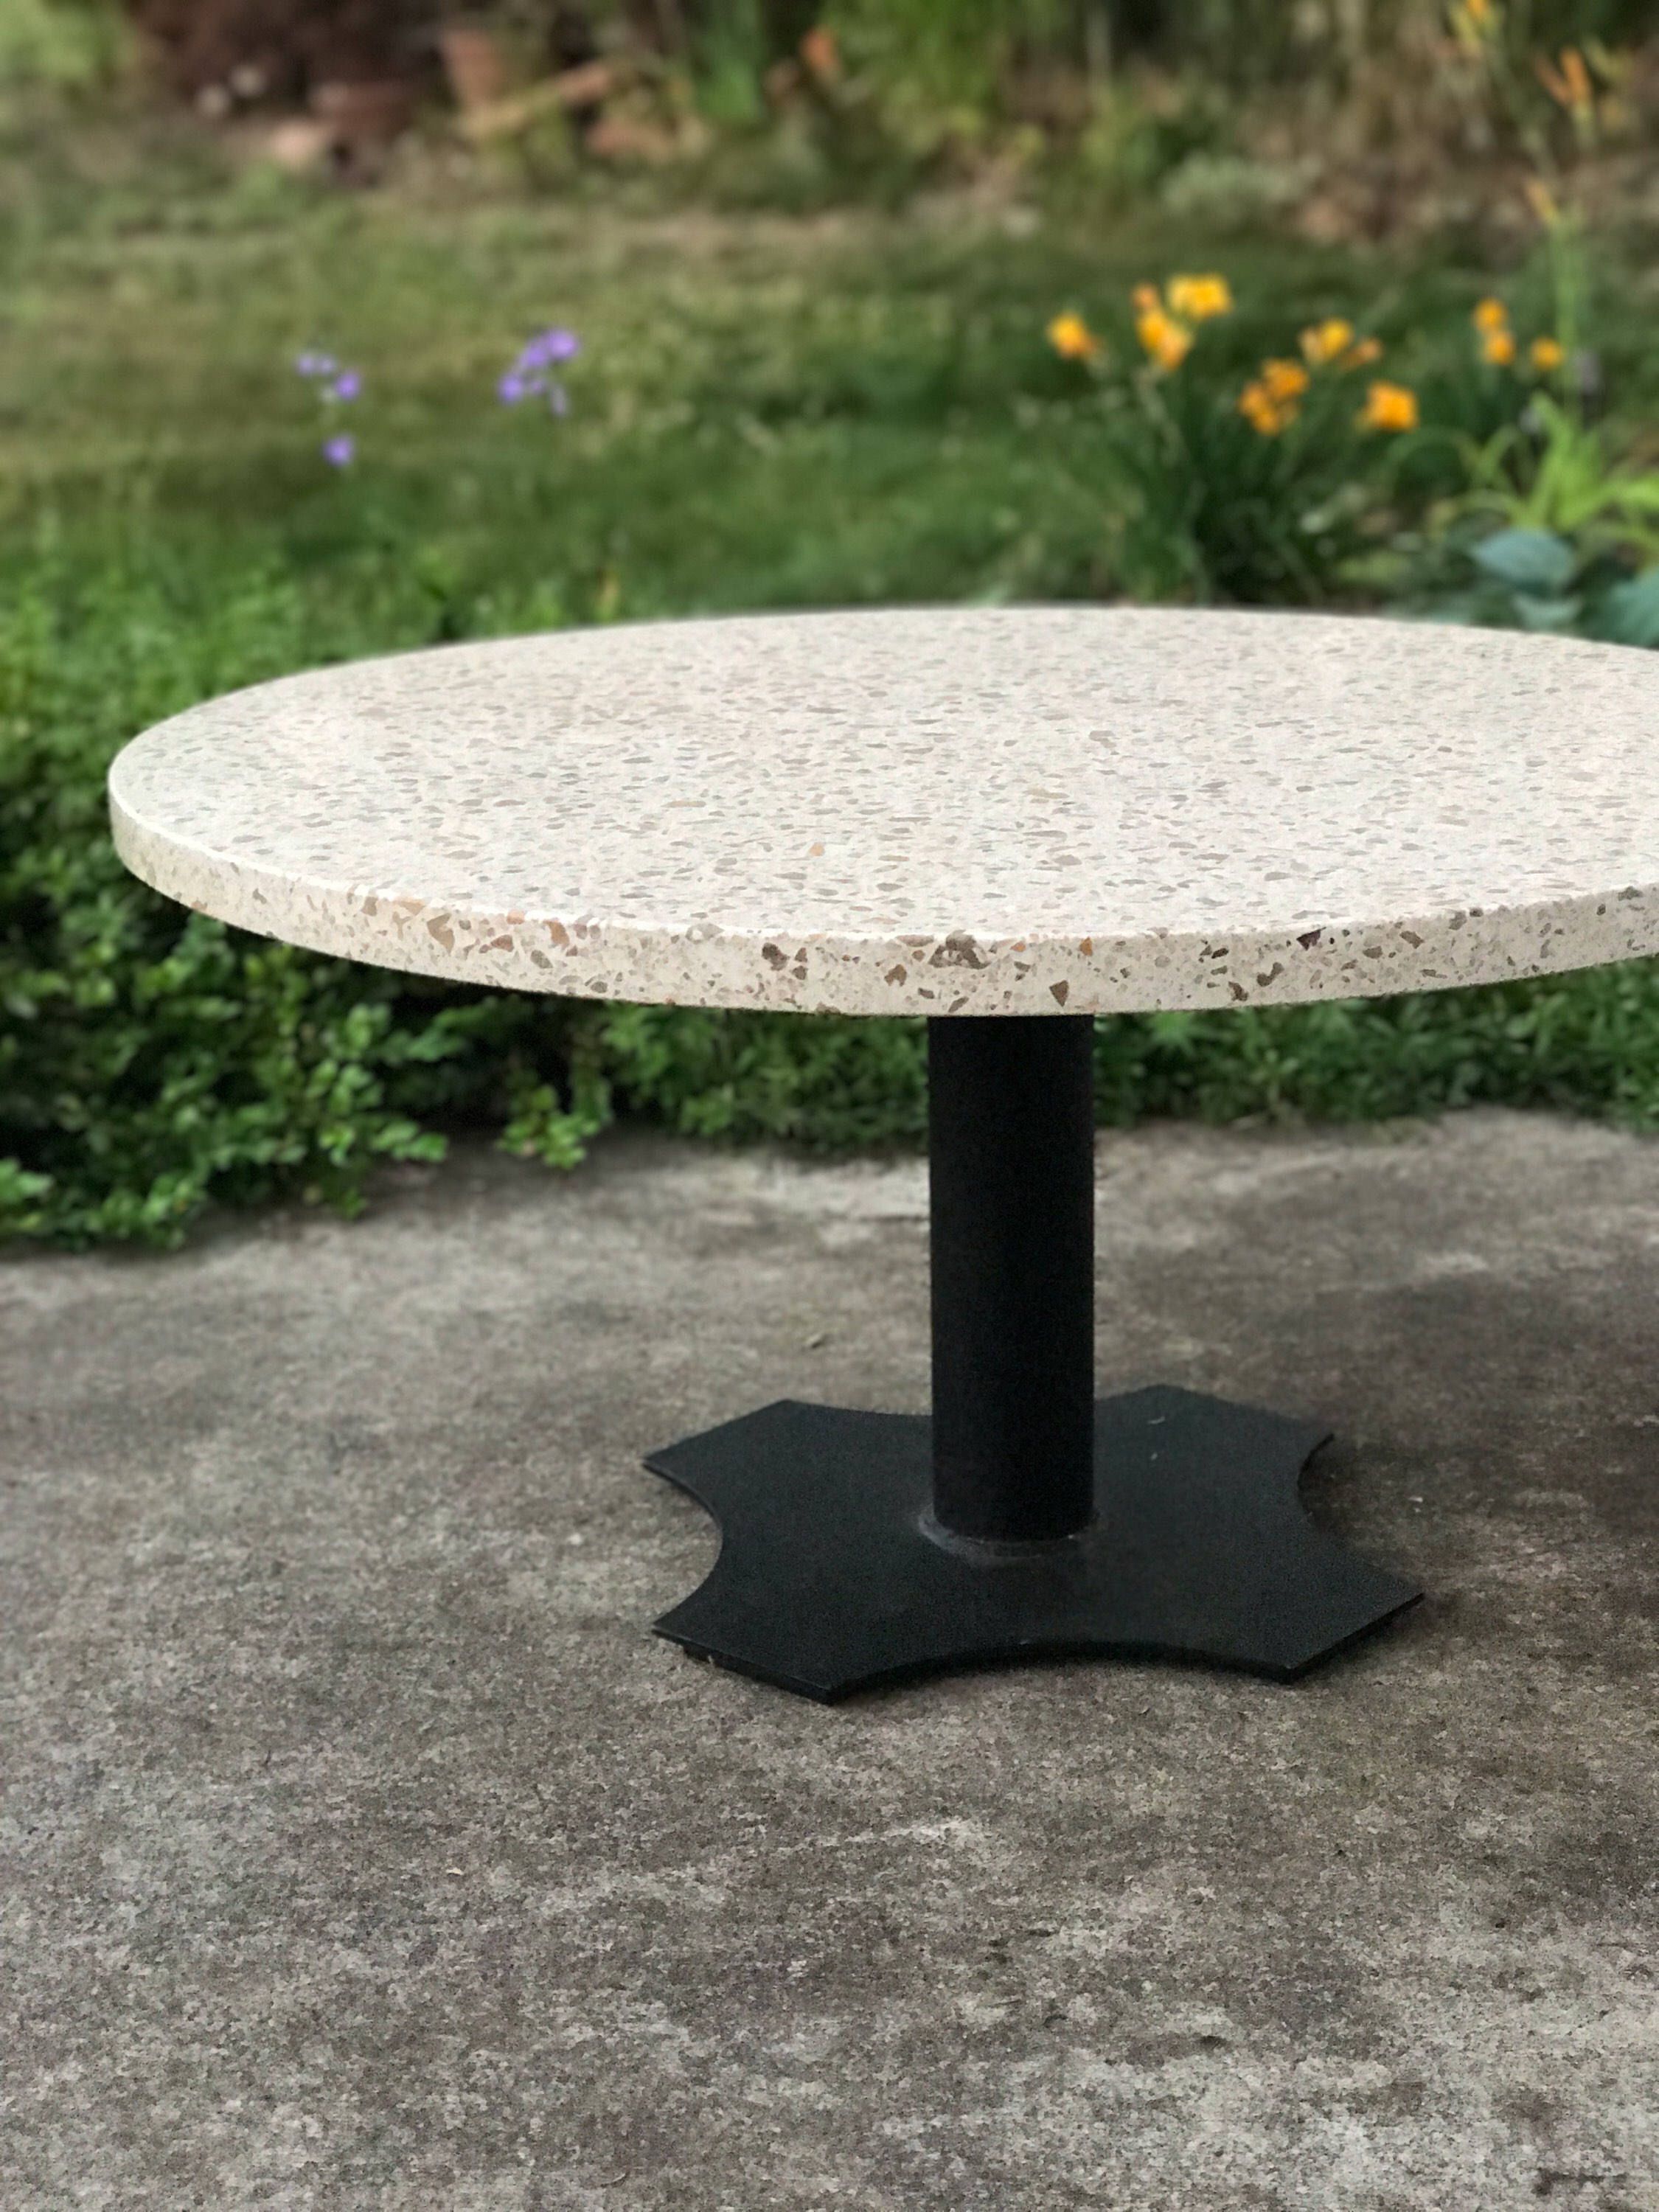 excited share the latest addition etsy vintage round accent table terrazo coffee mid century modern steel pedistal outdoor daybed cover kitchen diner farm style end tables glass